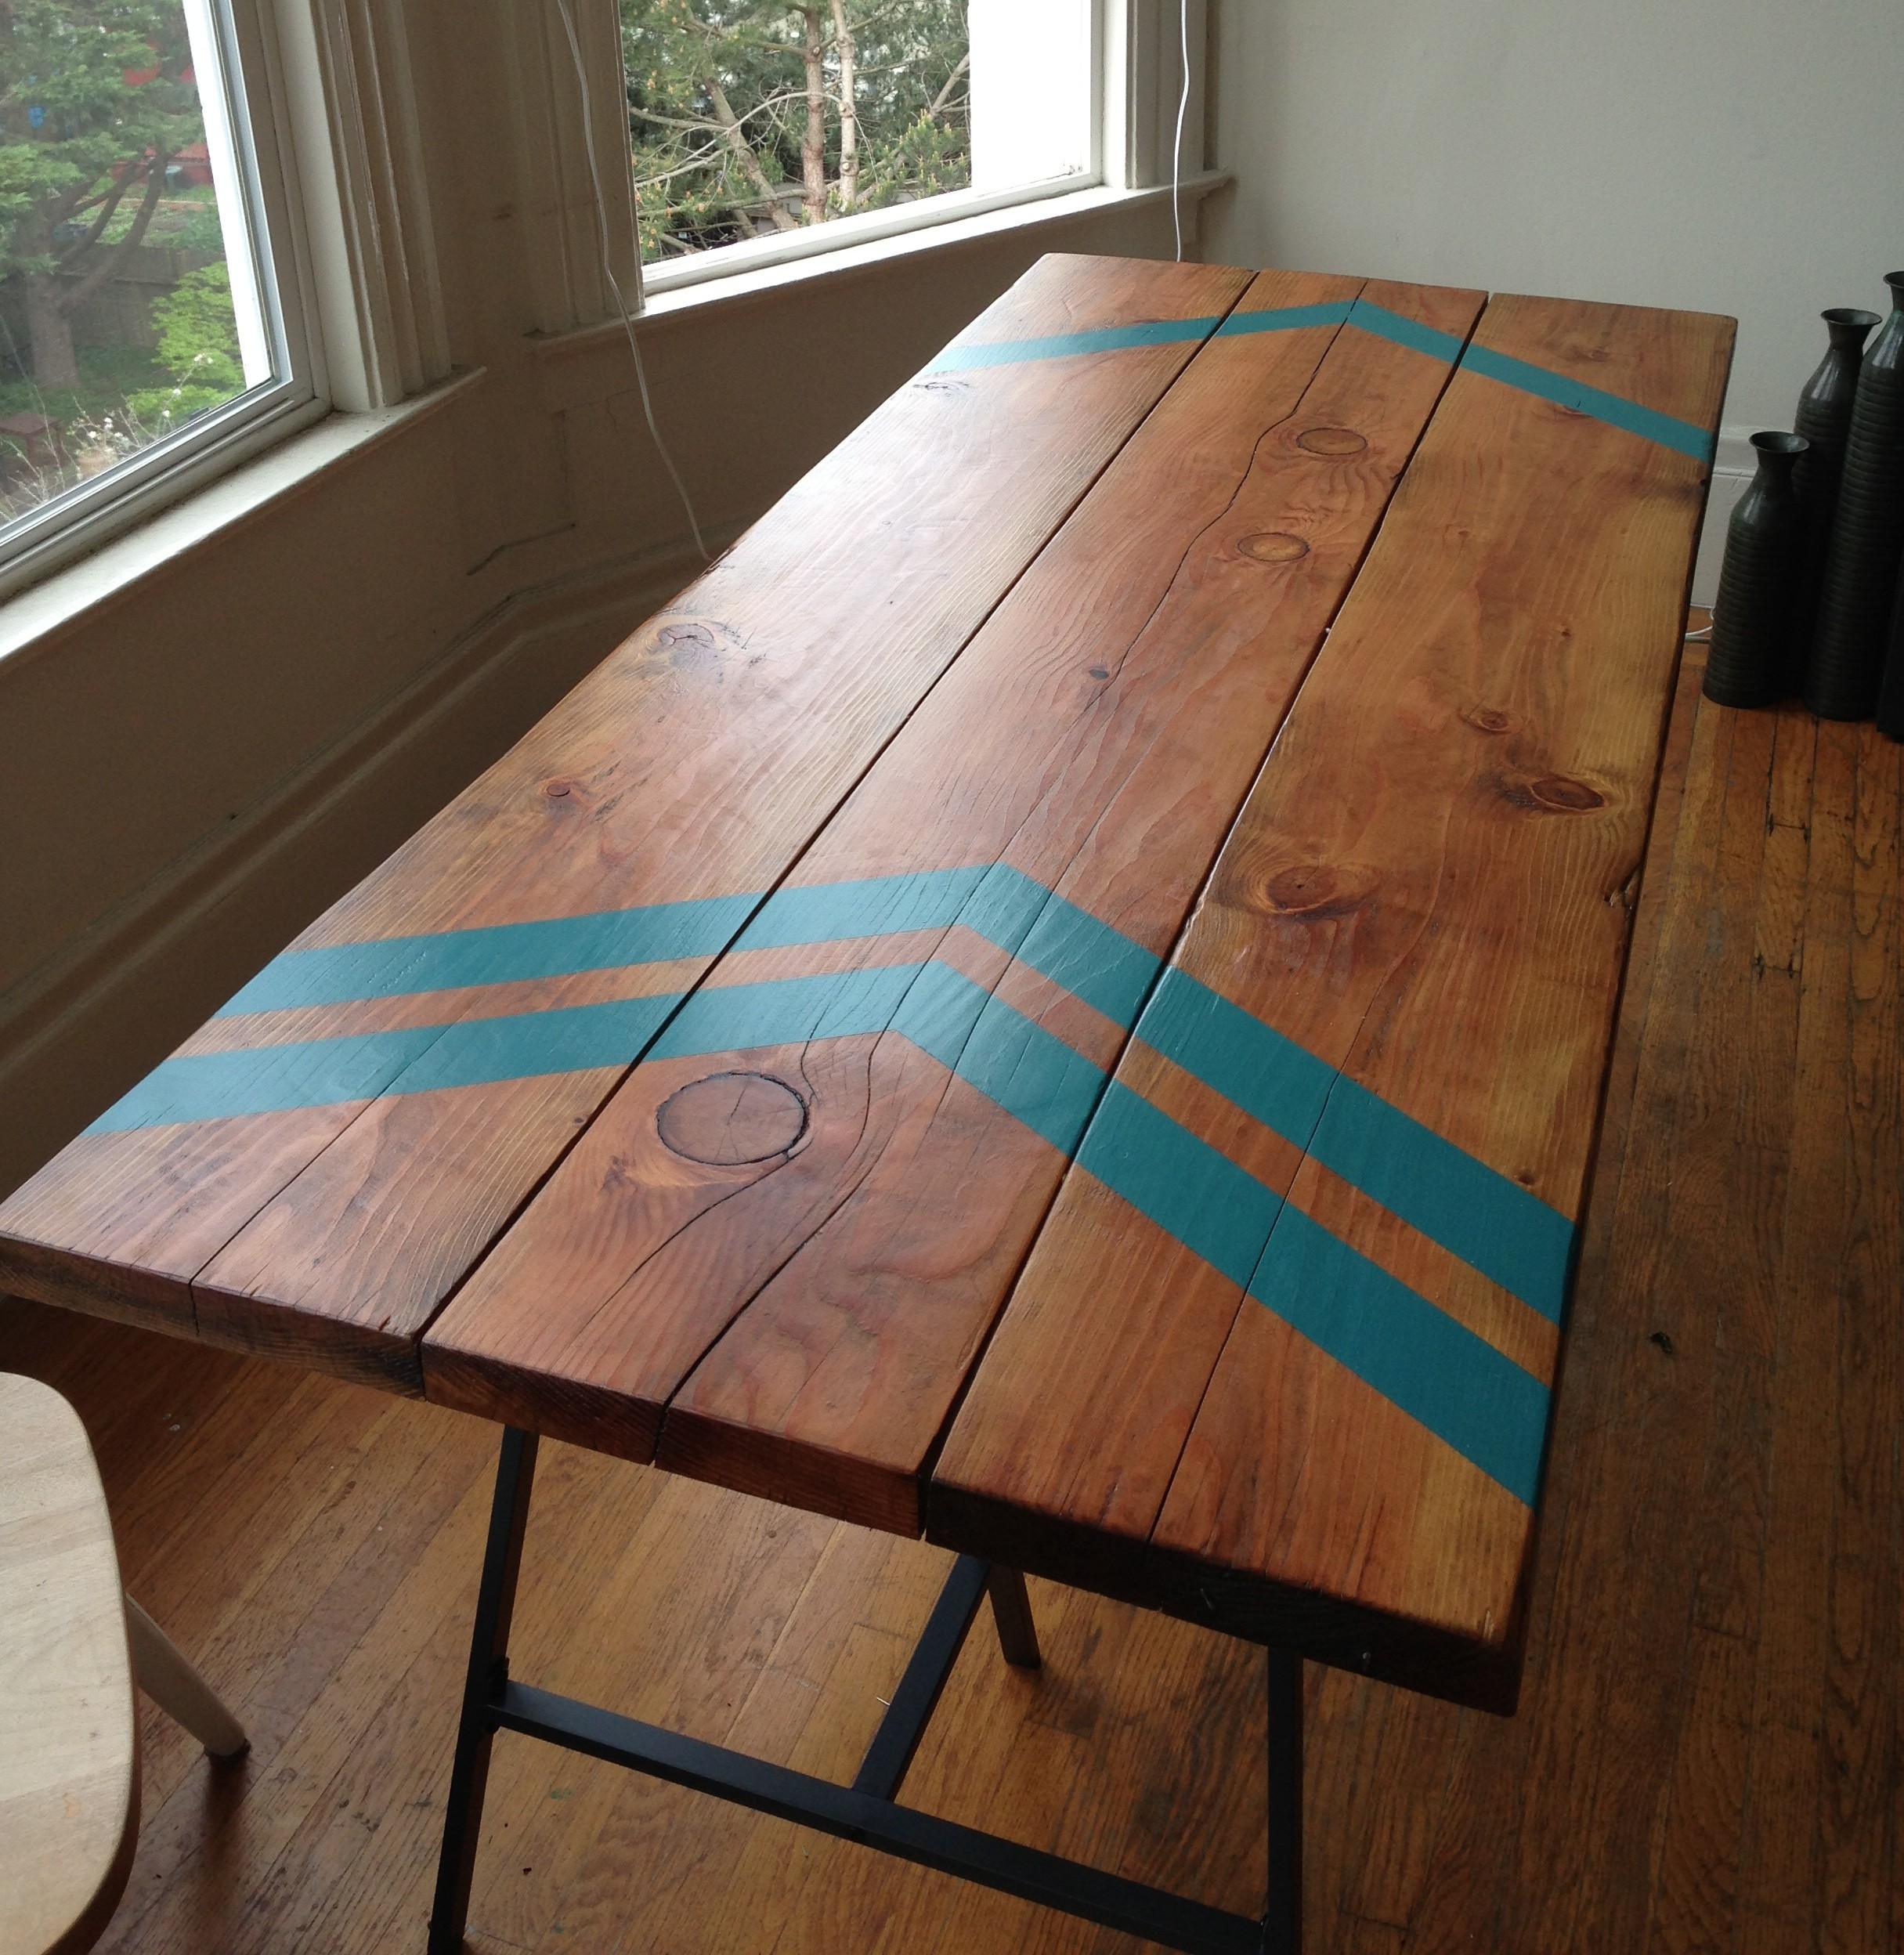 My Favorite Diy Kitchen Table Ideas, How To Make Your Own Wooden Table